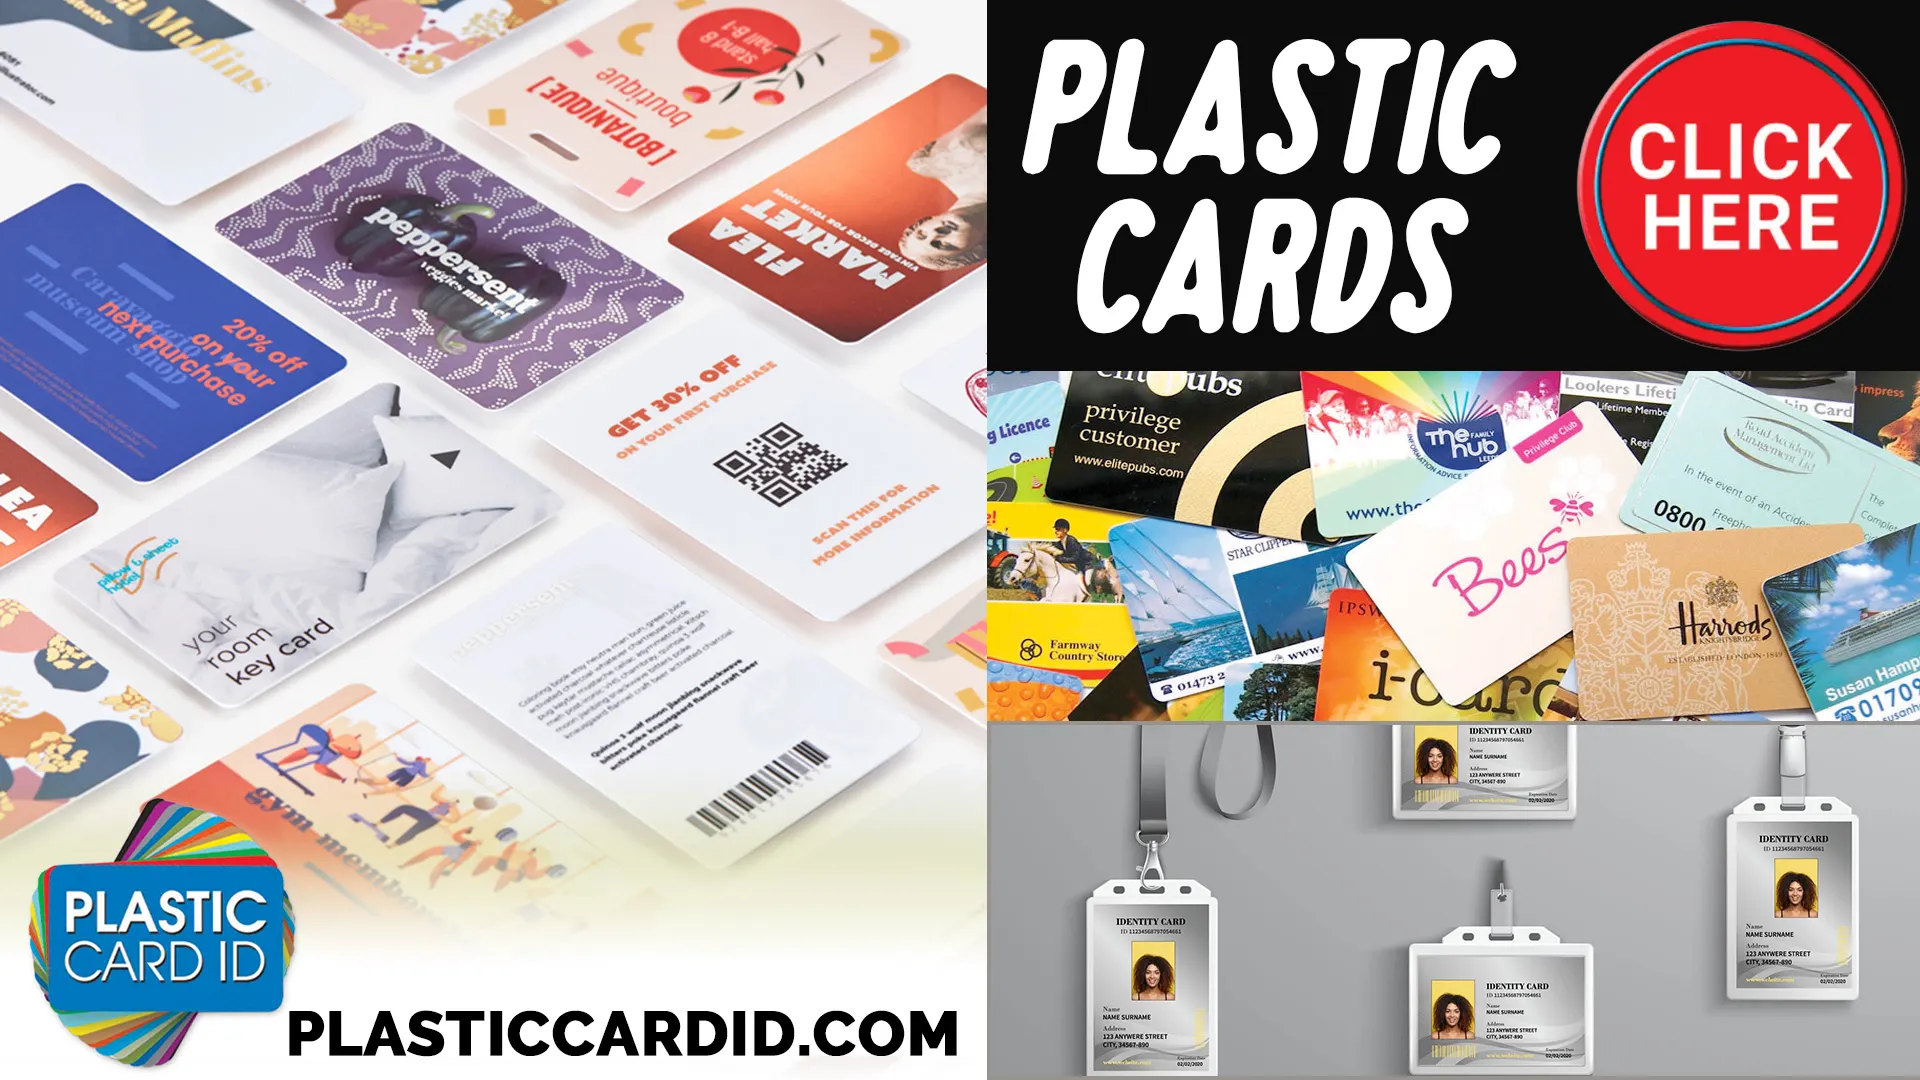 Plastic Card ID
's Advanced Technologies for Privacy Assurance